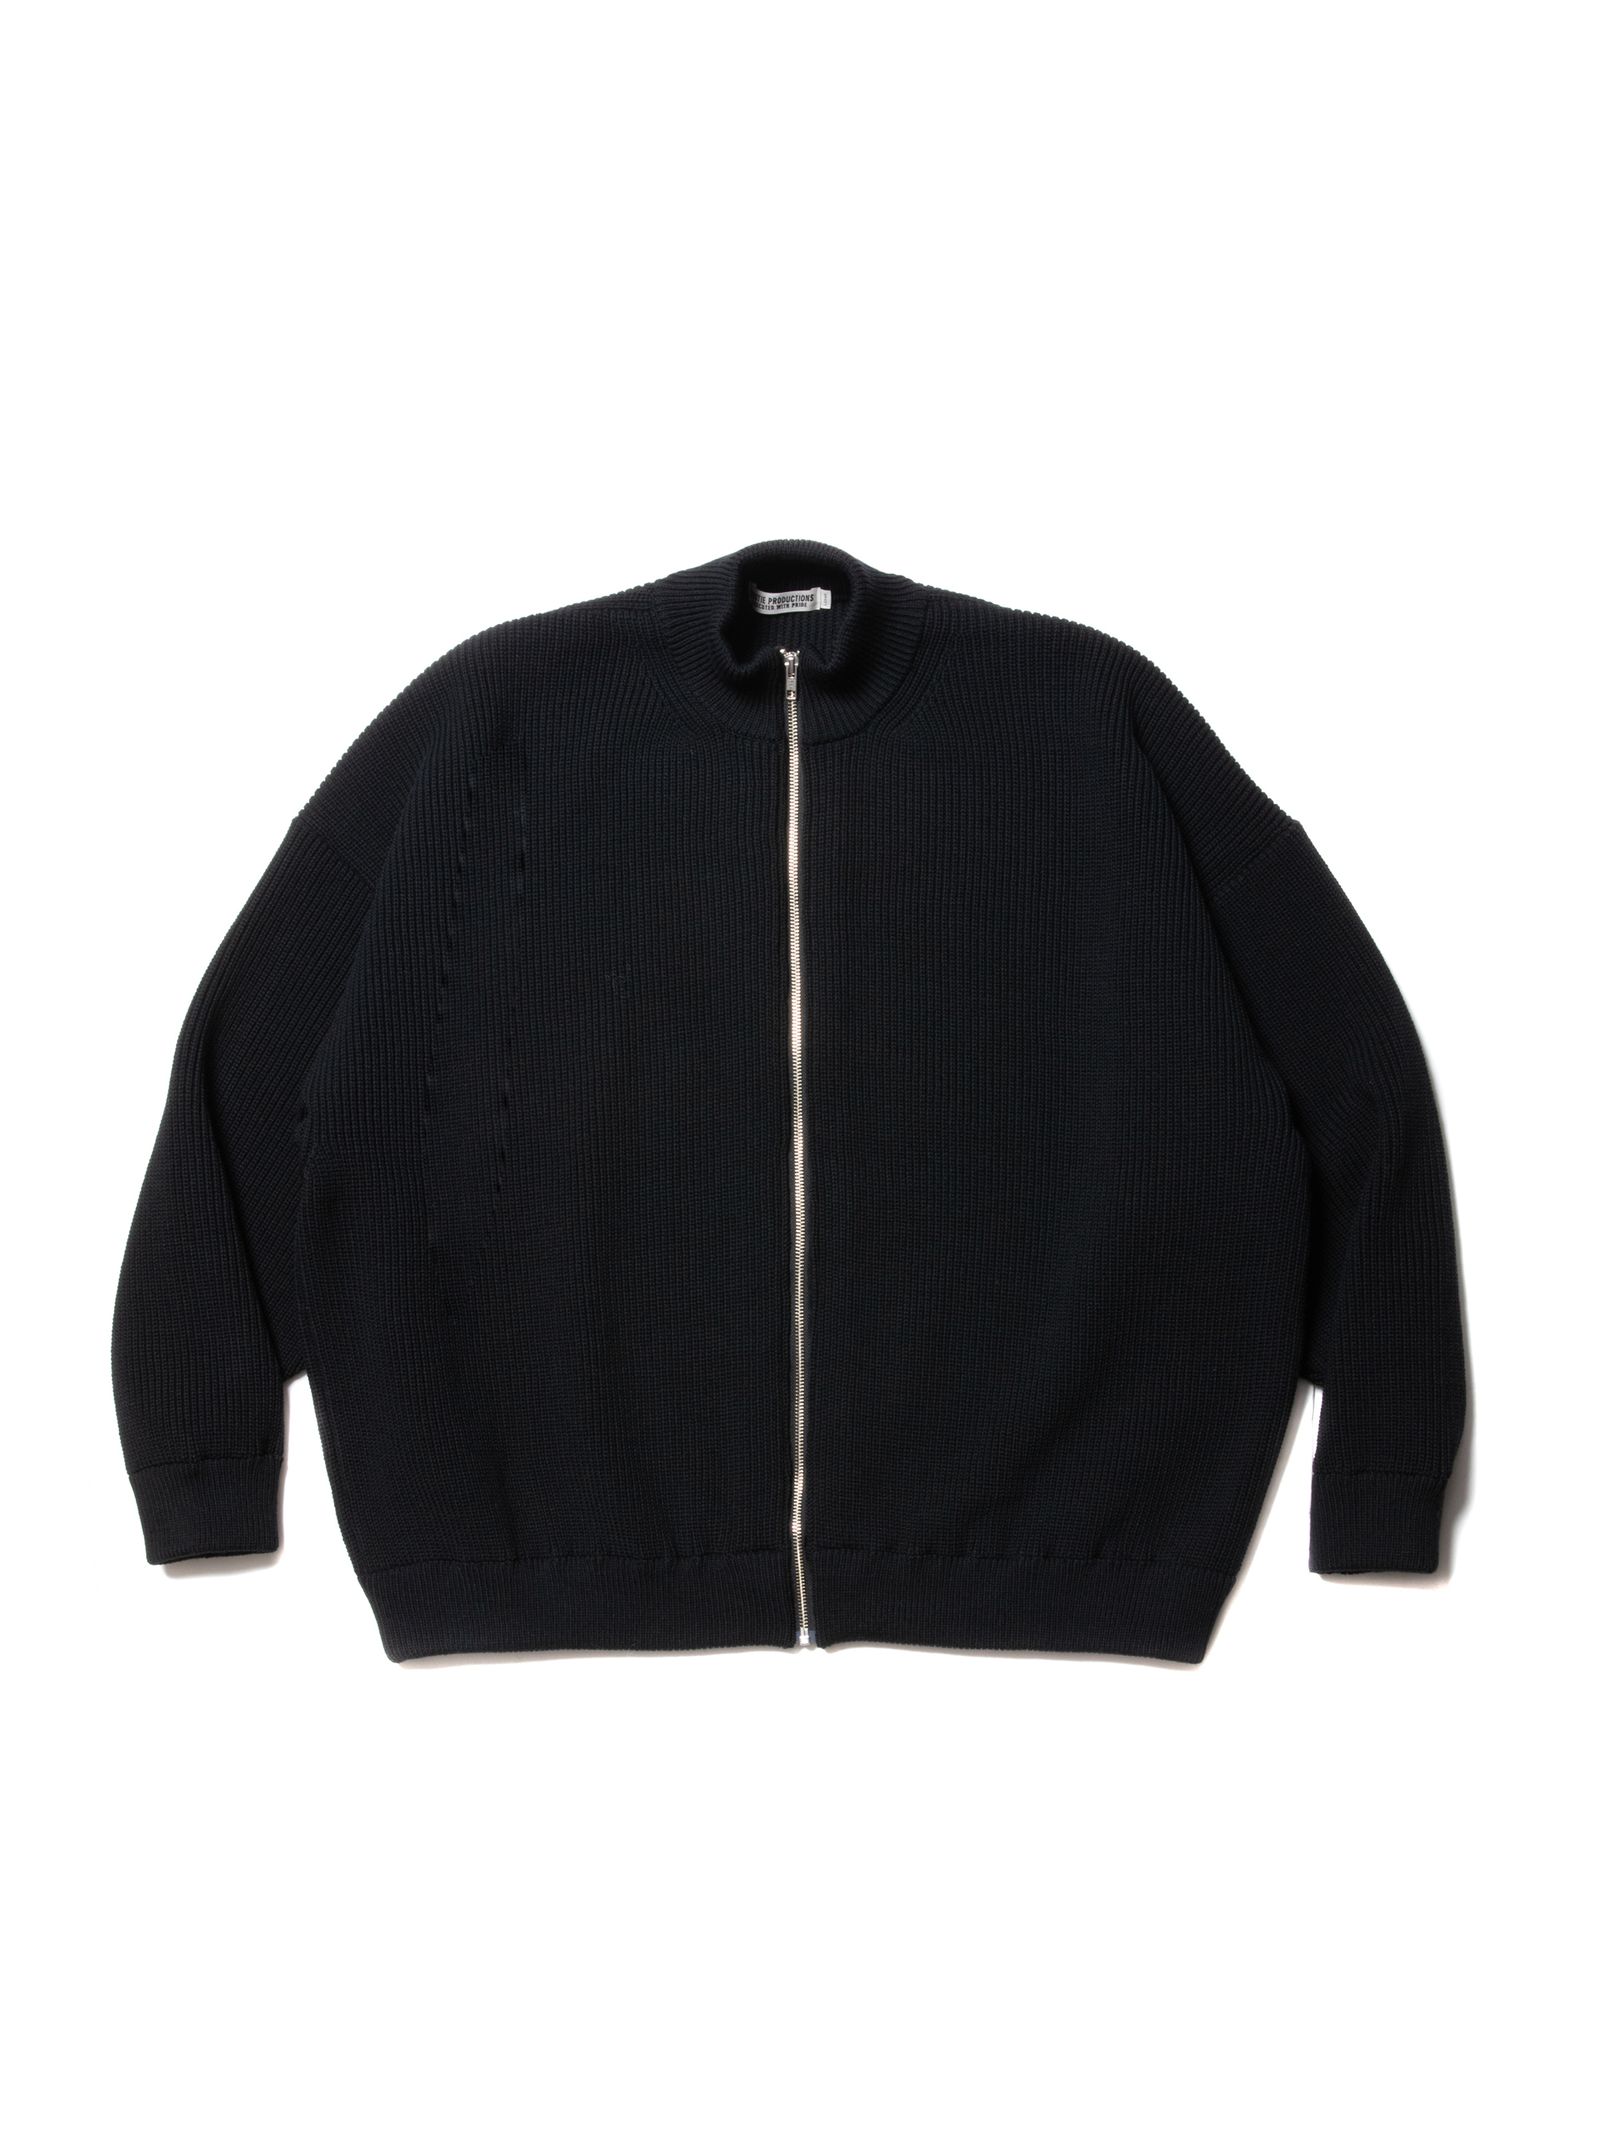 COOTIE PRODUCTIONS - Rib Stitch Drivers Sweater (BLACK) / リブ編み 